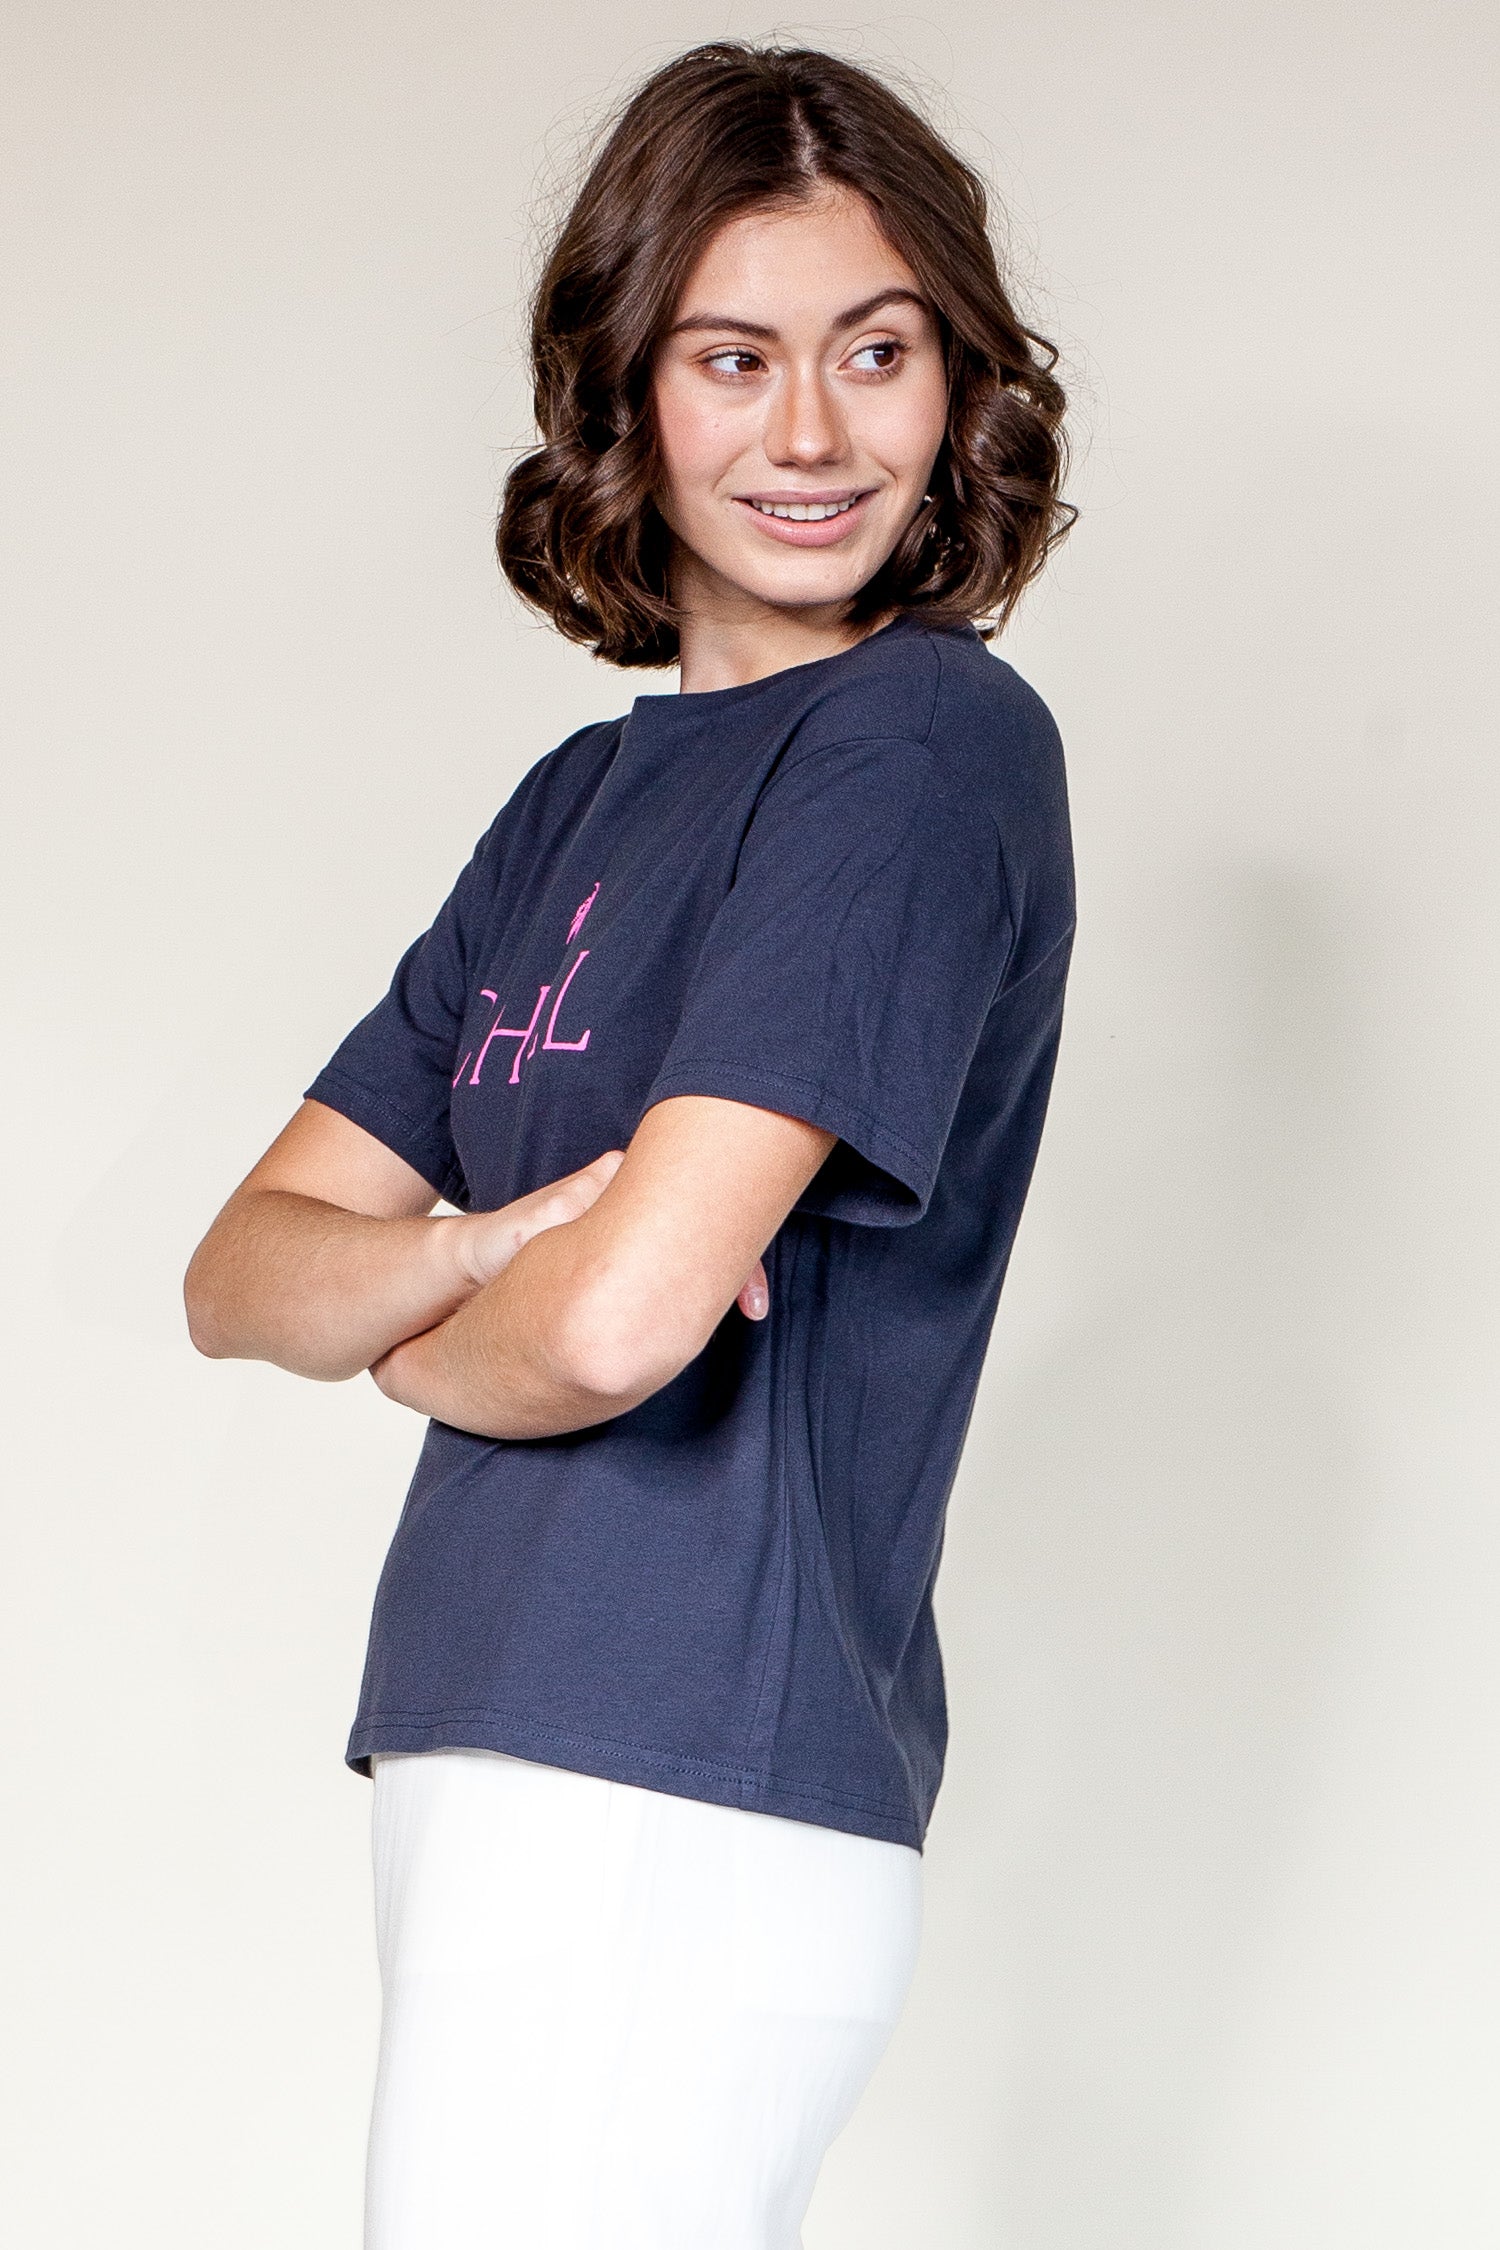 Chill T-Shirt-Navy - Pink Martini Collection